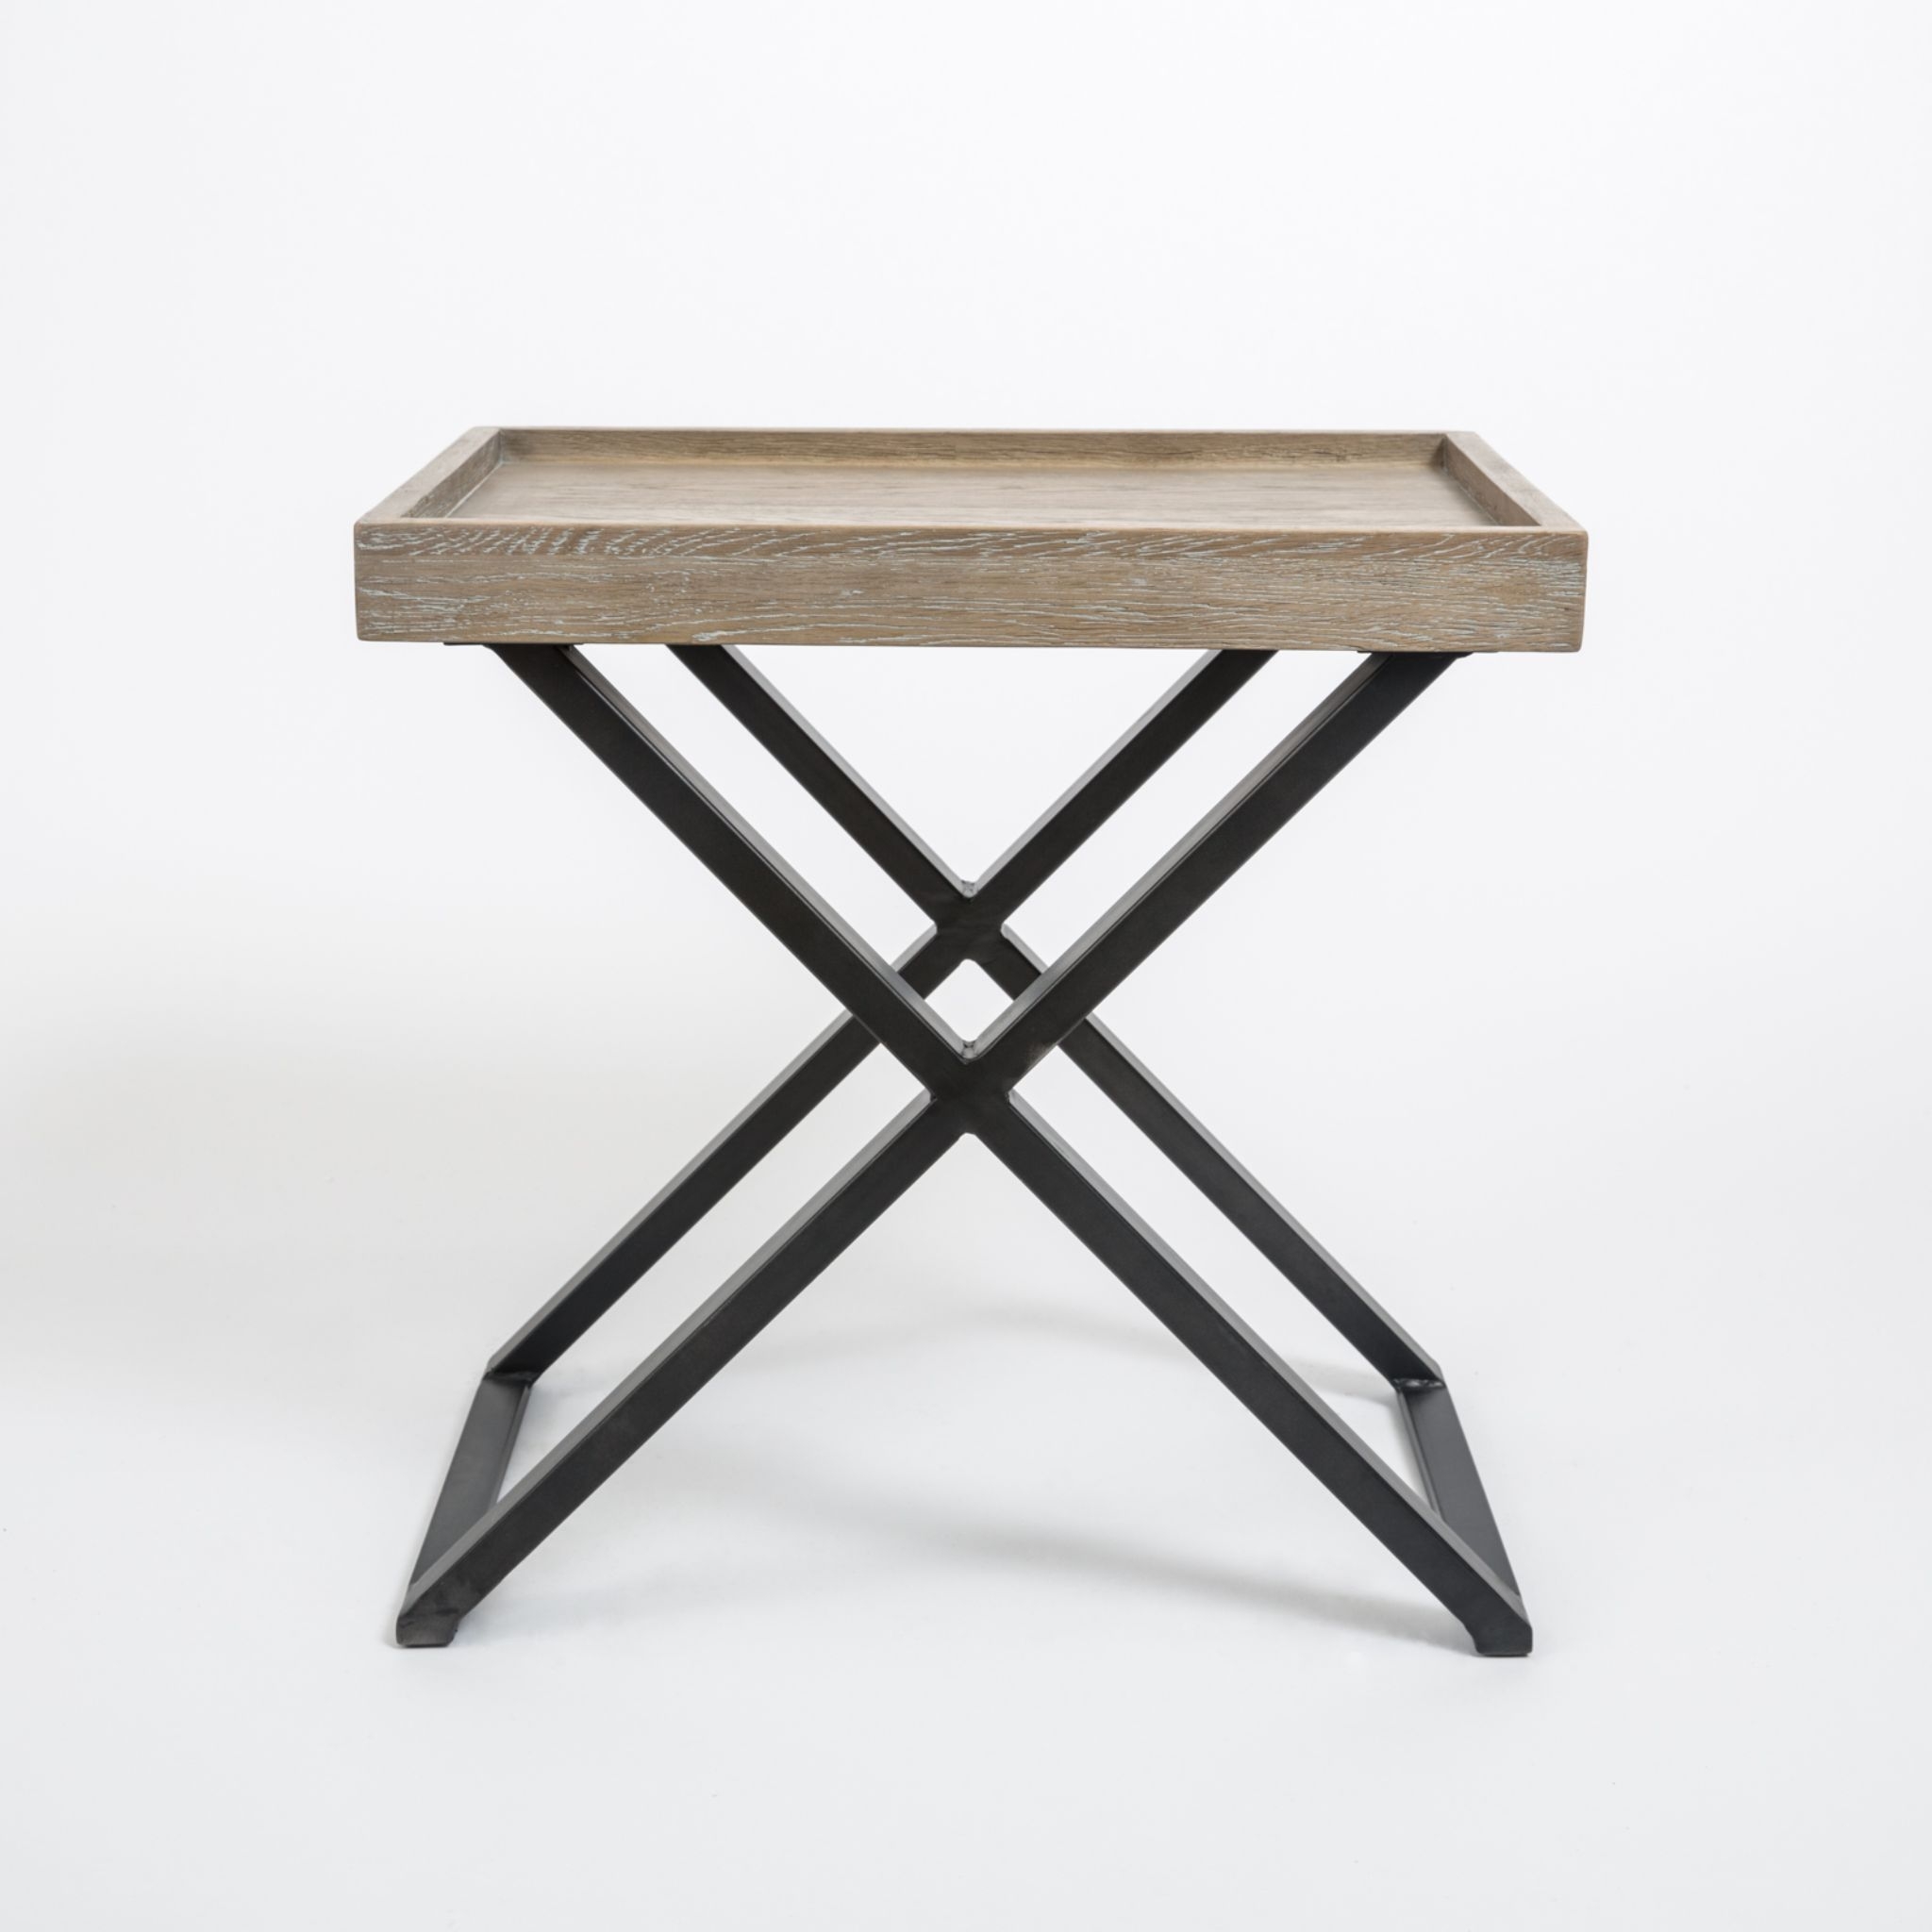 Clementine End Table in Aged Oak with Black Metal Legs – Furniture & Homeware – The Luxe Home